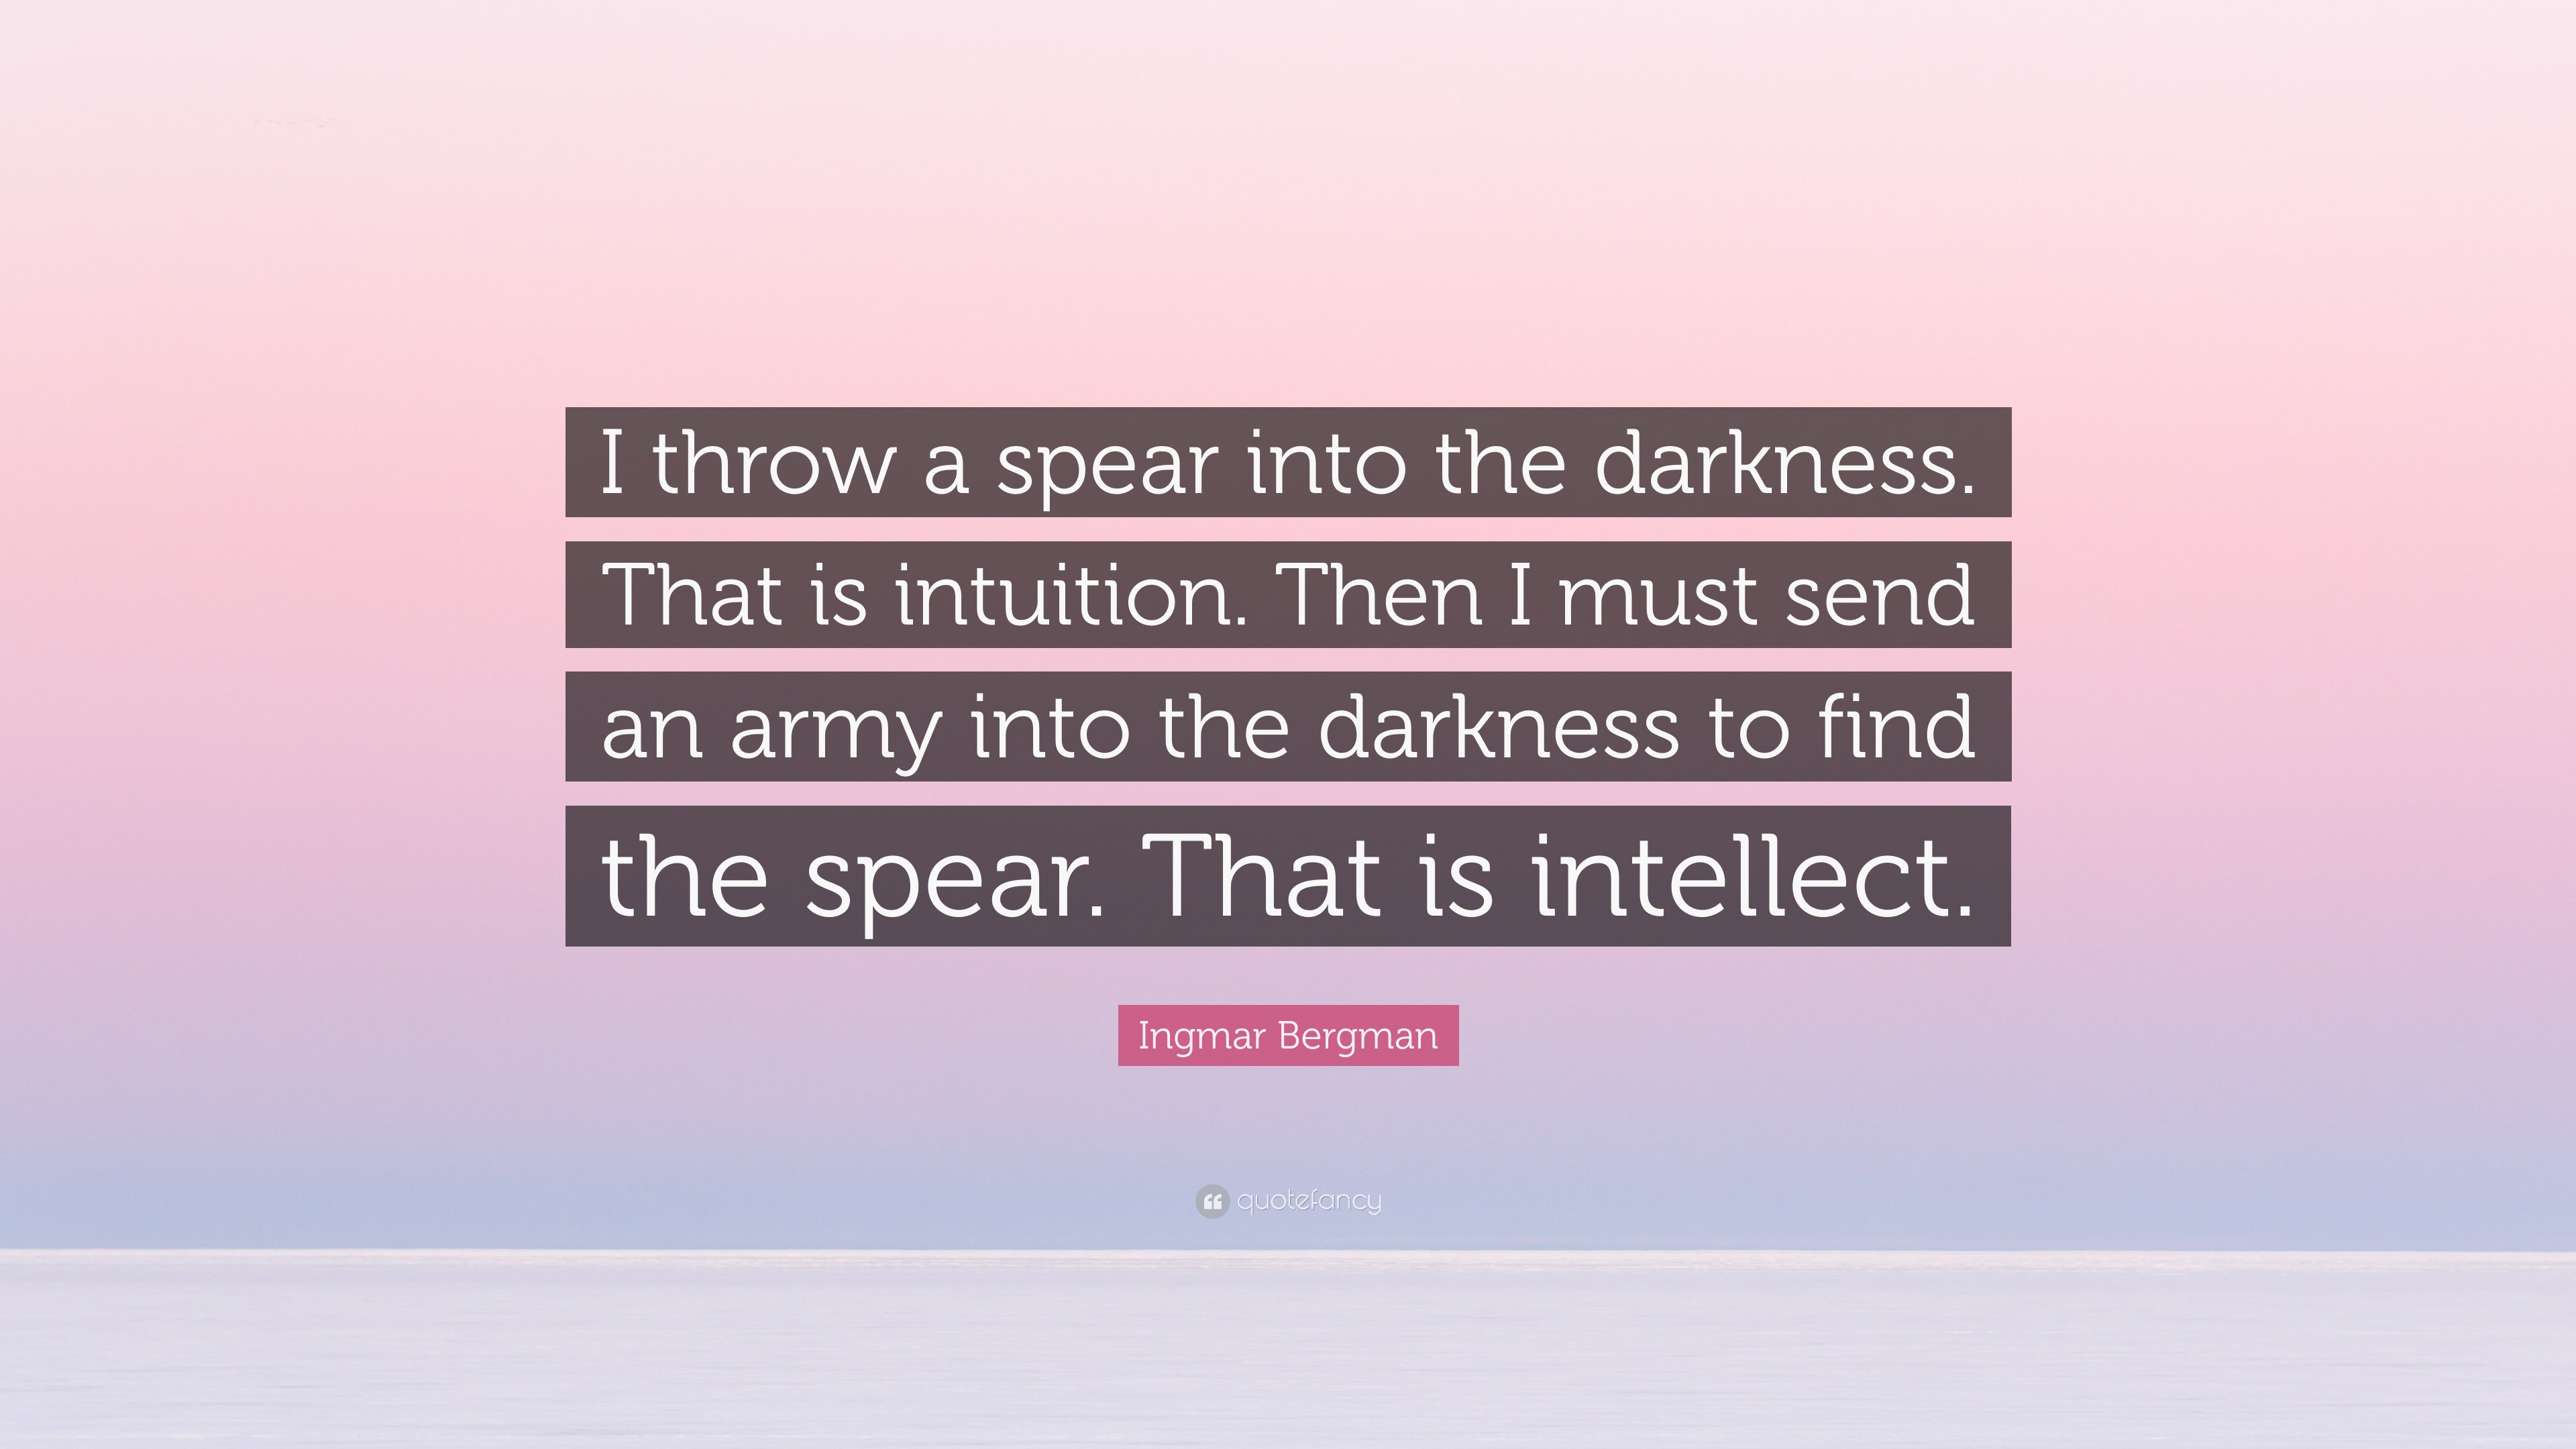 Ingmar Bergman Quote: “I throw a spear into the darkness. That is  intuition. Then I must send an army into the darkness to find the spear.  That”